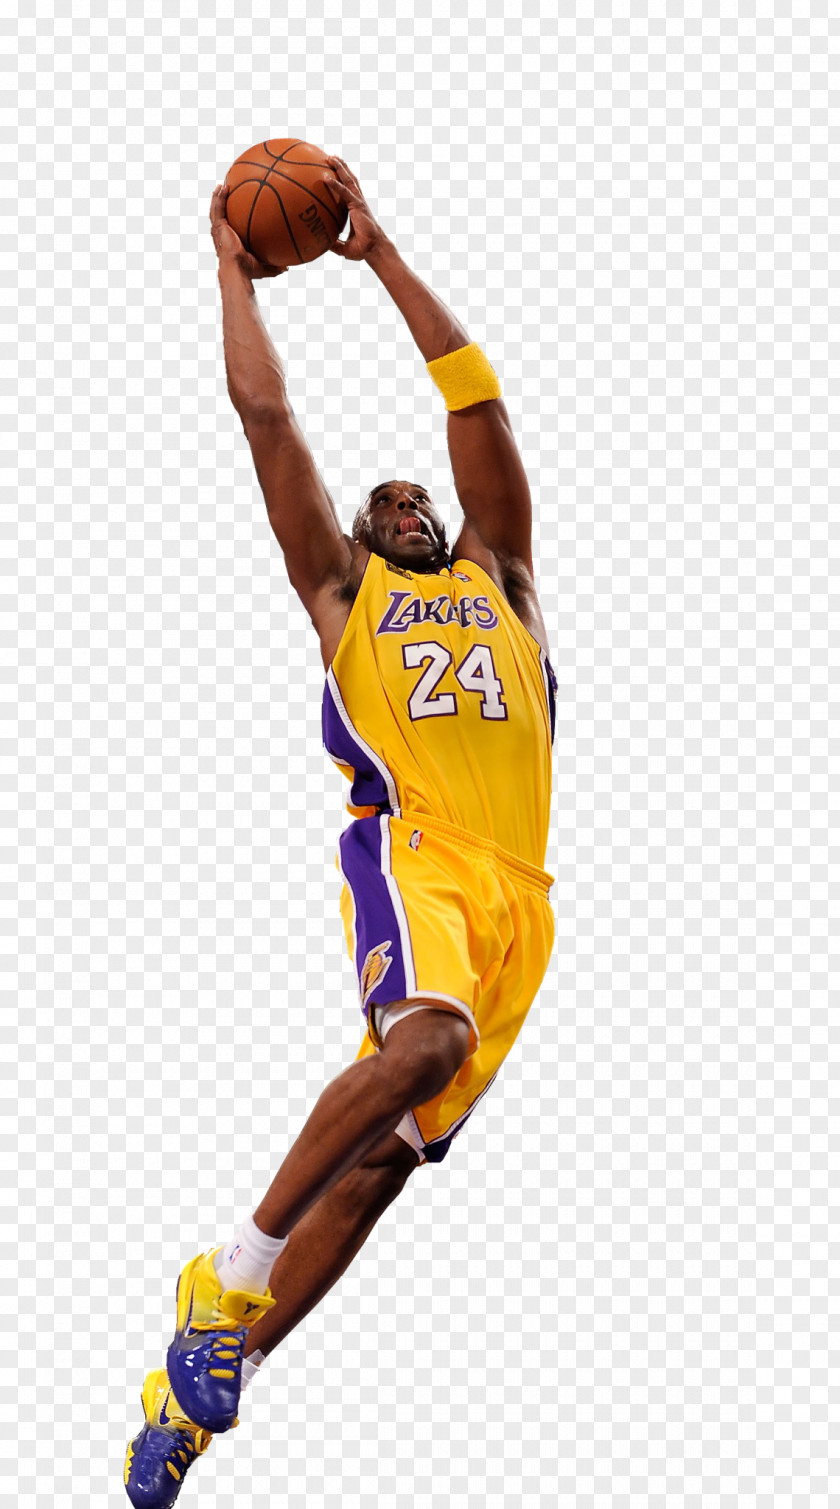 Kobe Bryant Image Nike Poster Los Angeles Lakers Just Do It PNG